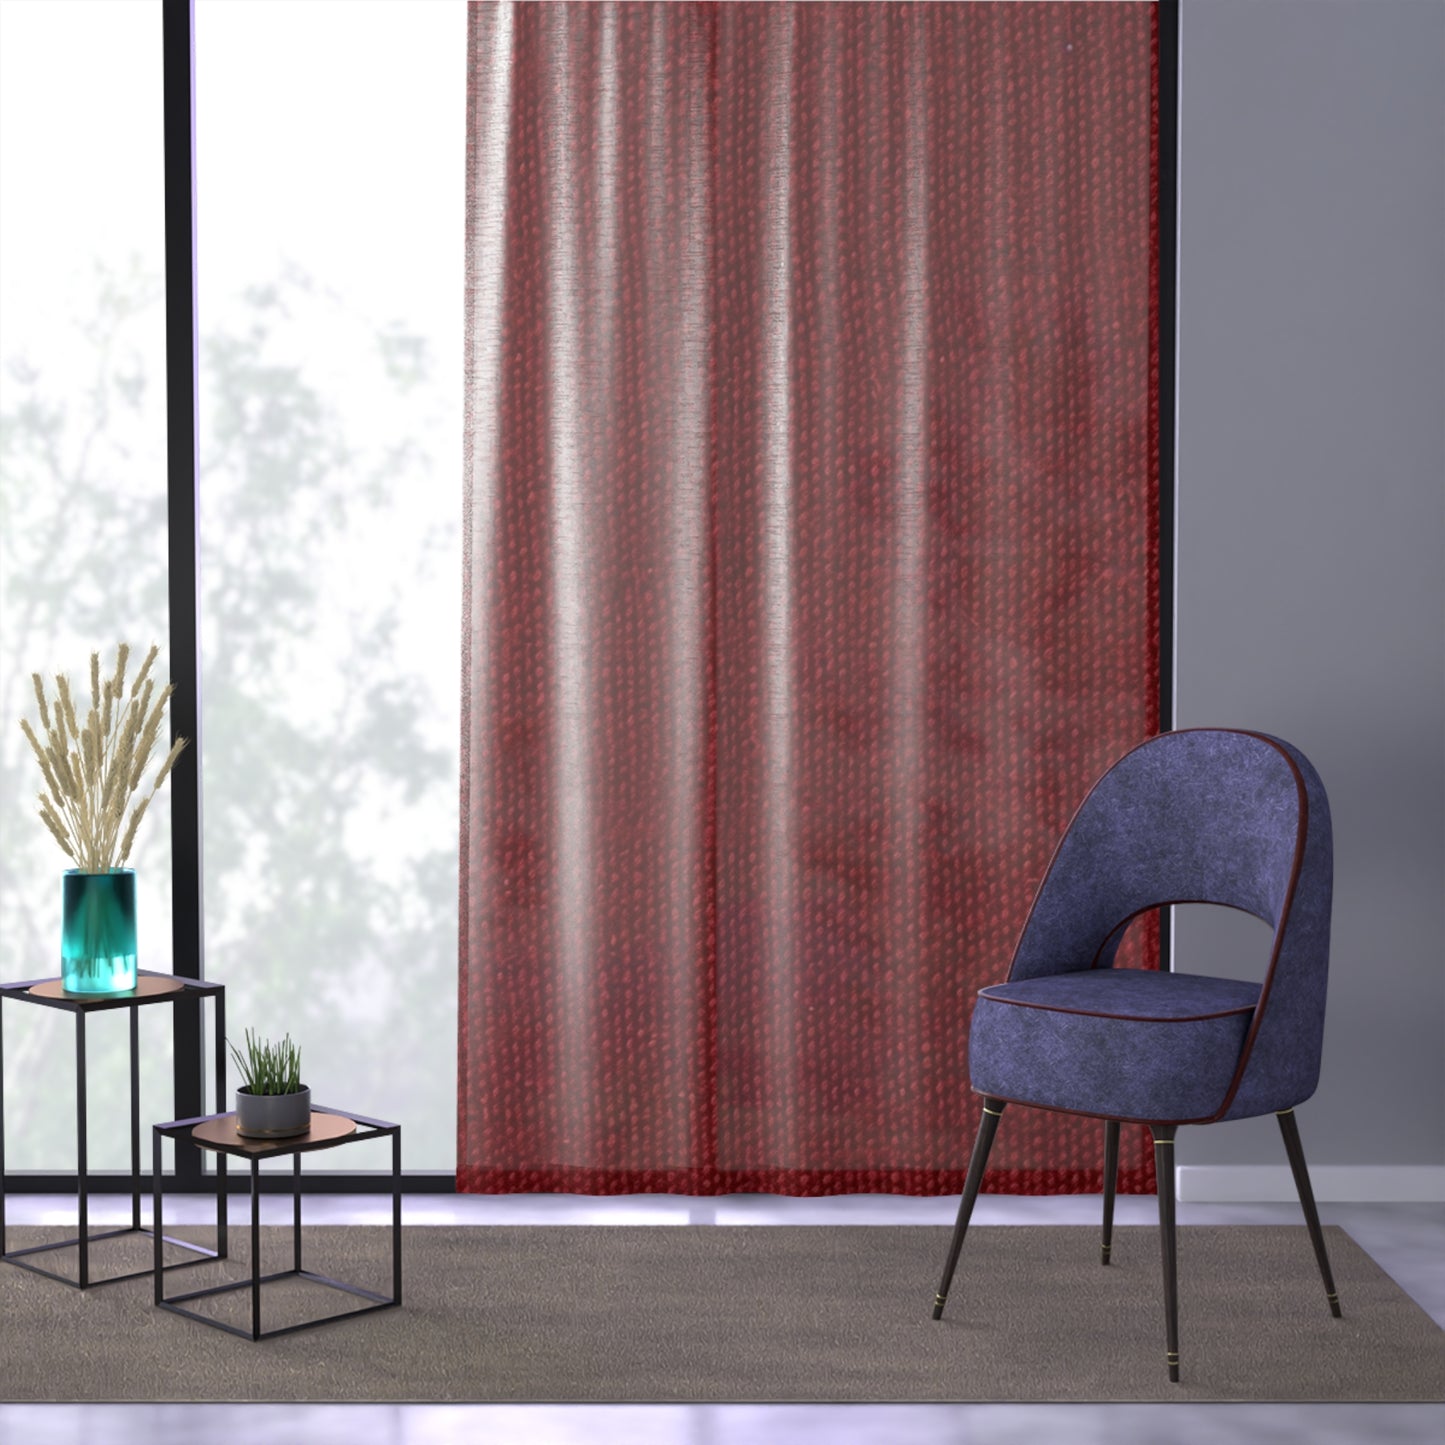 Bold Ruby Red: Denim-Inspired, Passionate Fabric Style - Window Curtain